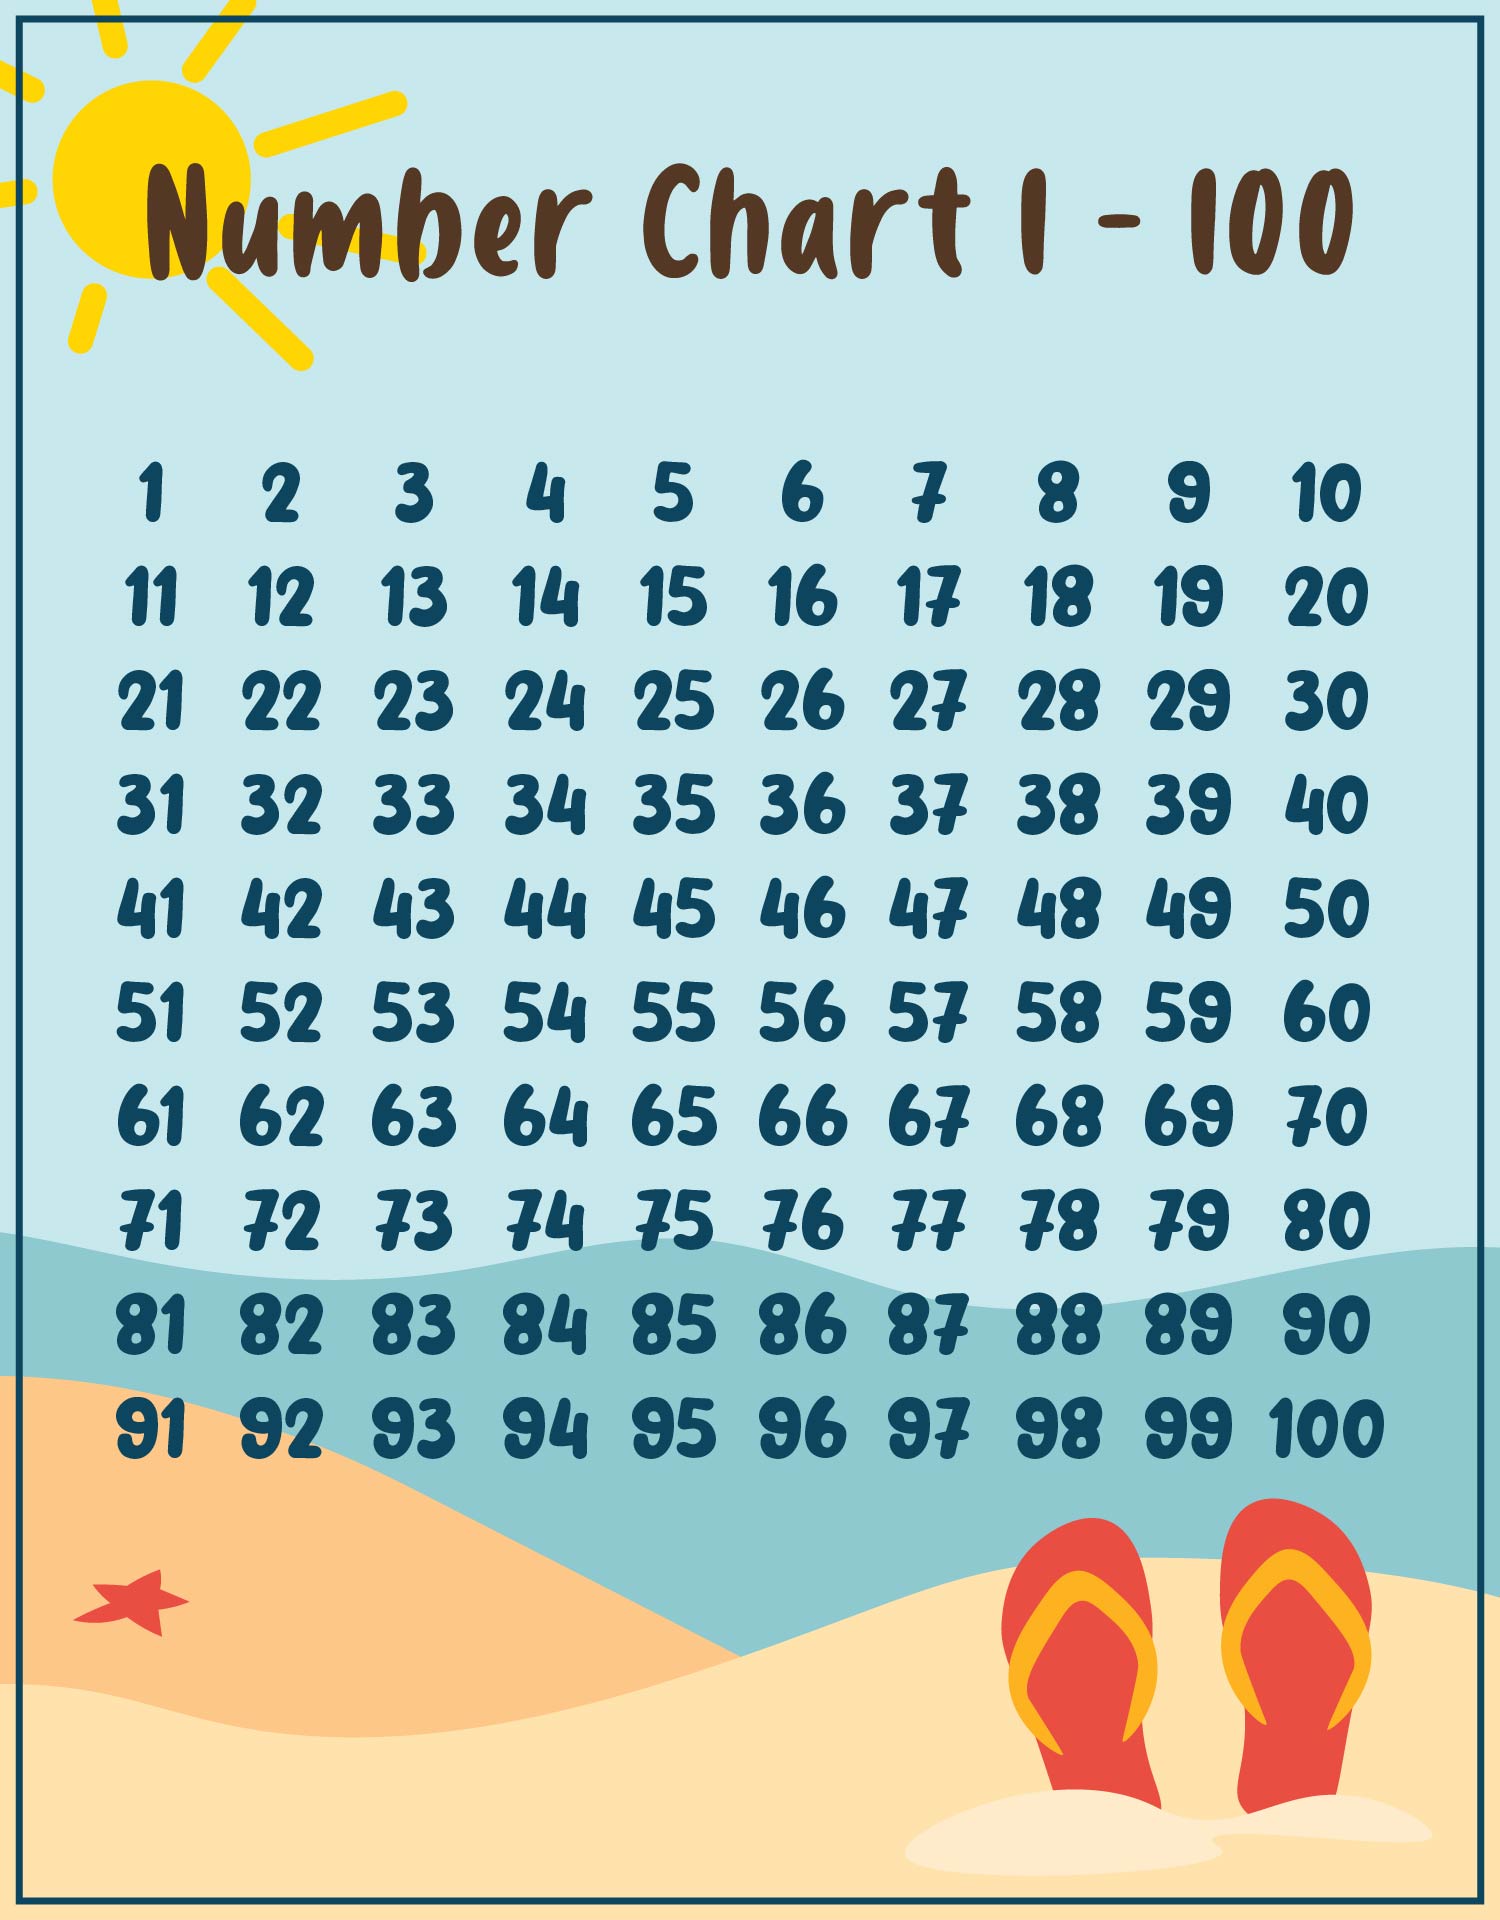 number-chart-1-to-100-with-image-printable-and-downloadable-maths